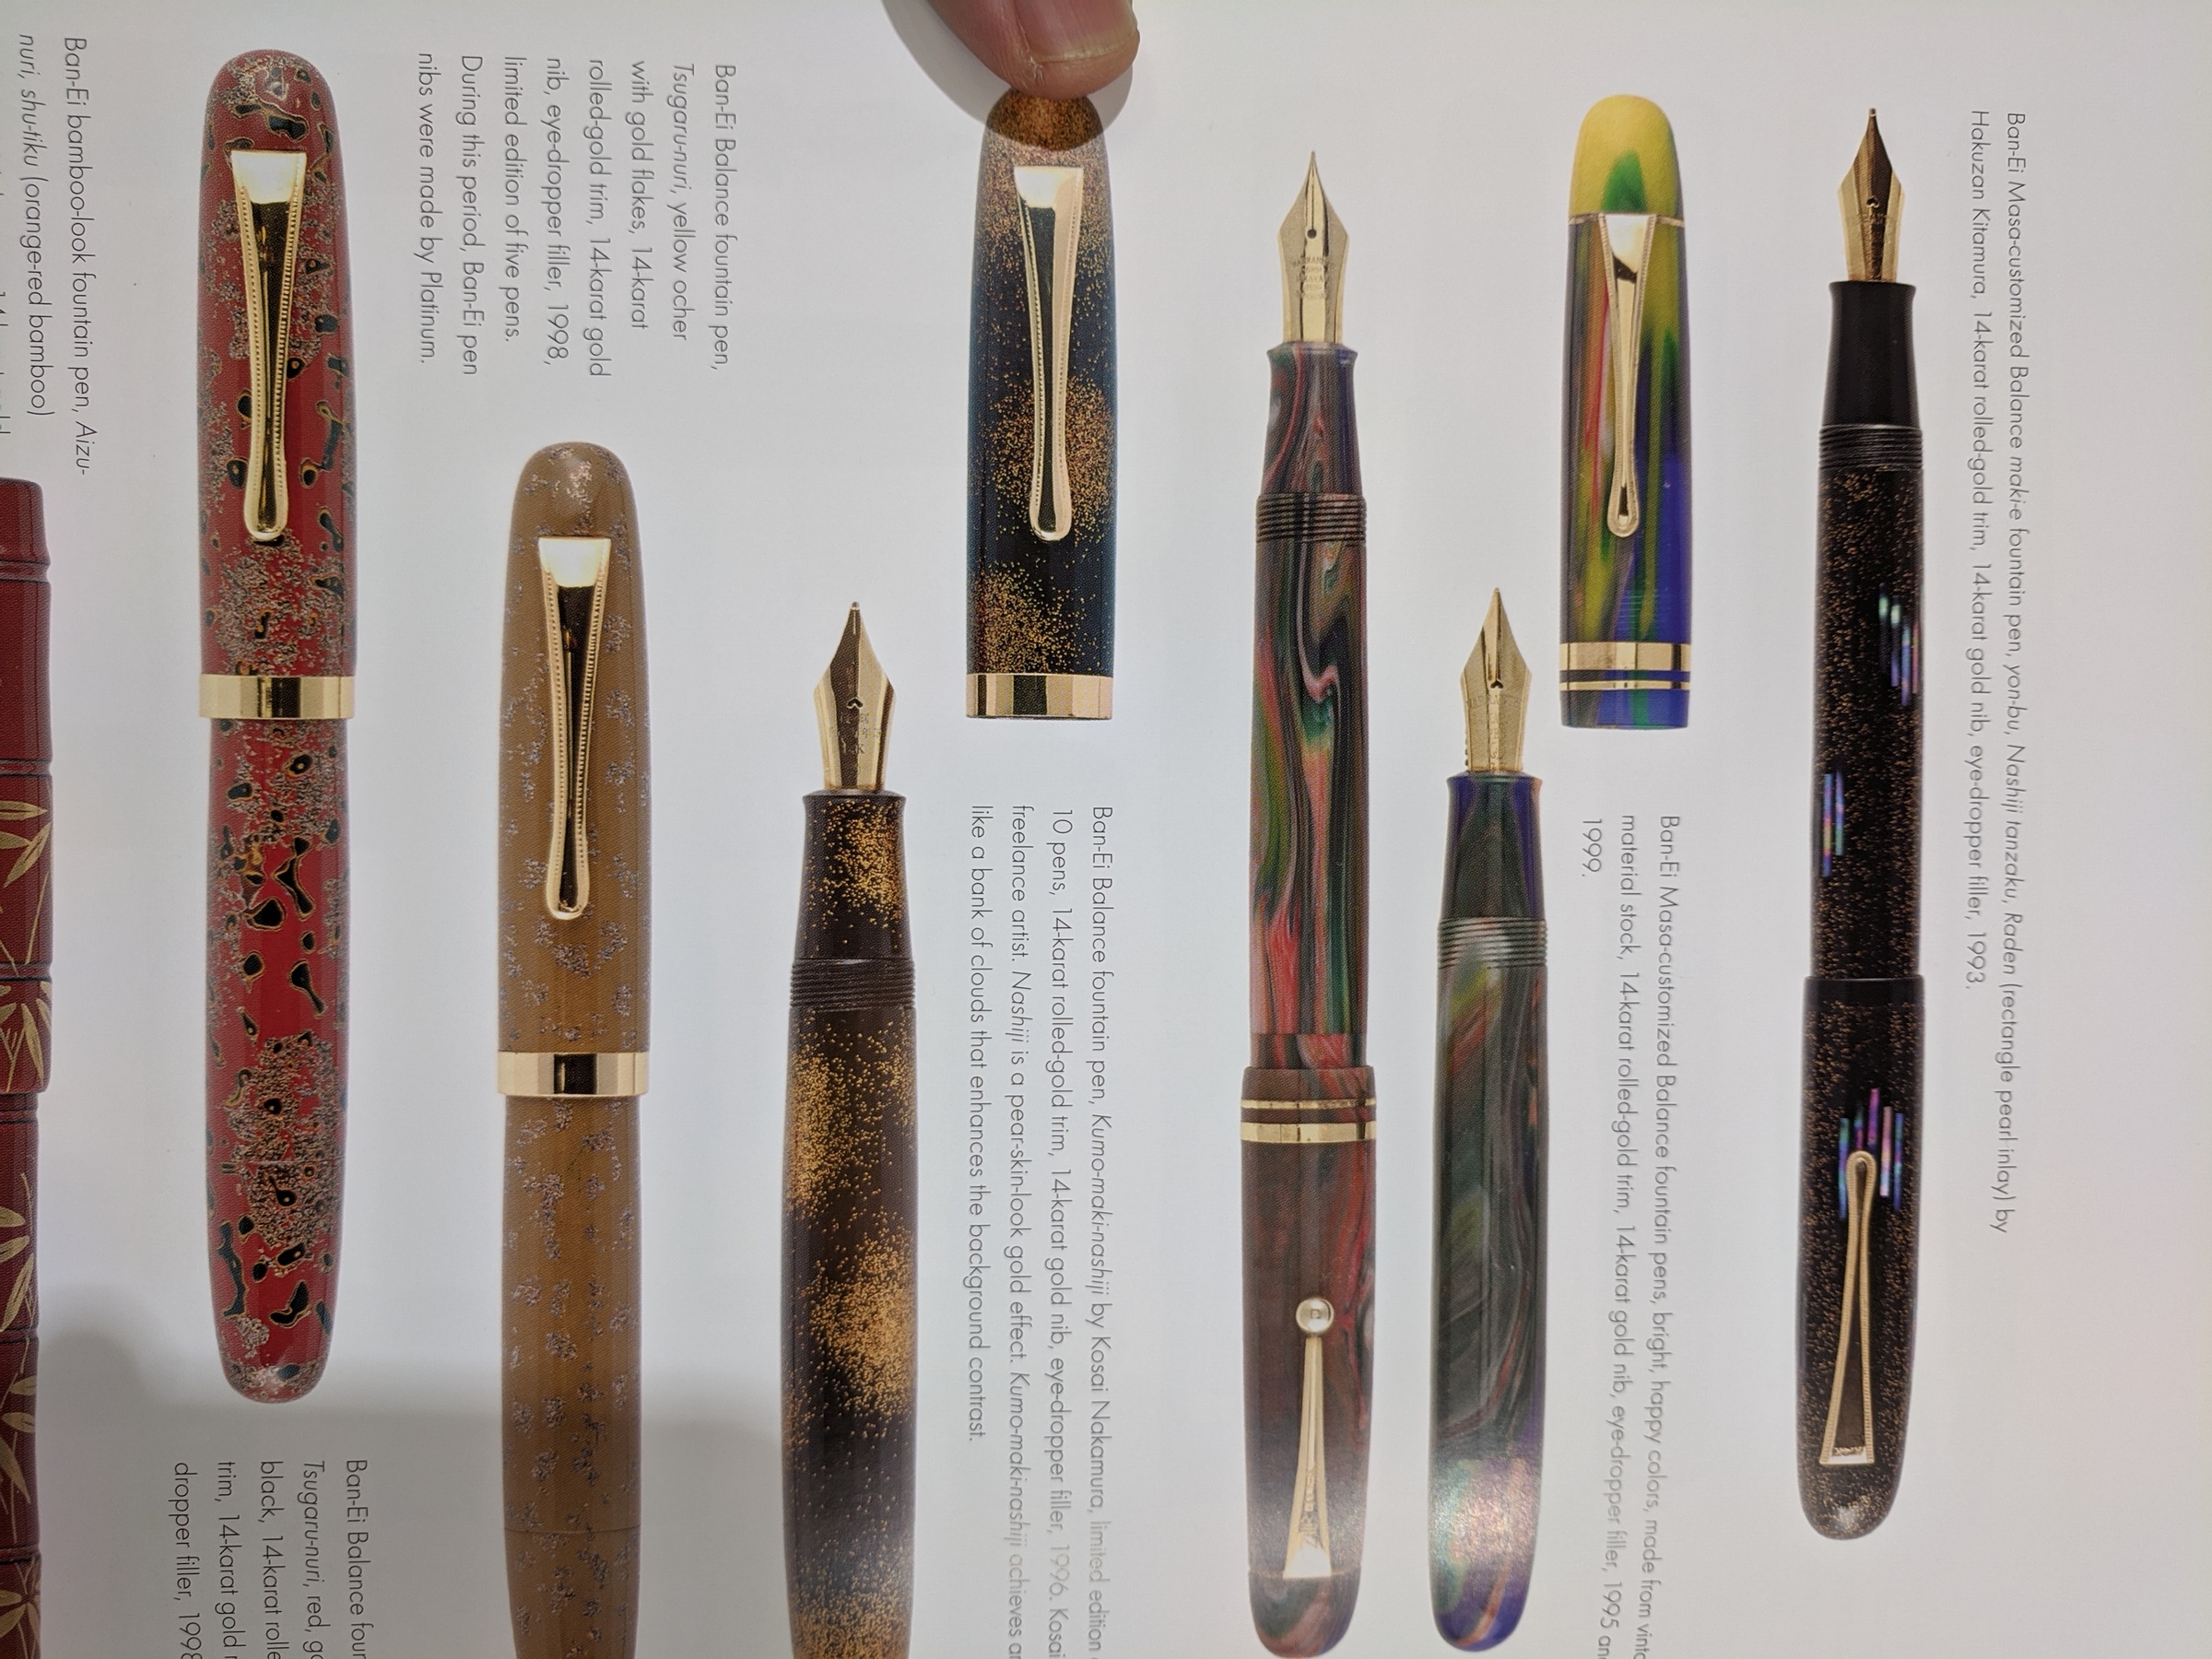 Fountain Pens of the World / Fountain Pens of Japan Hardcover 鋼筆聖經世界／日本板